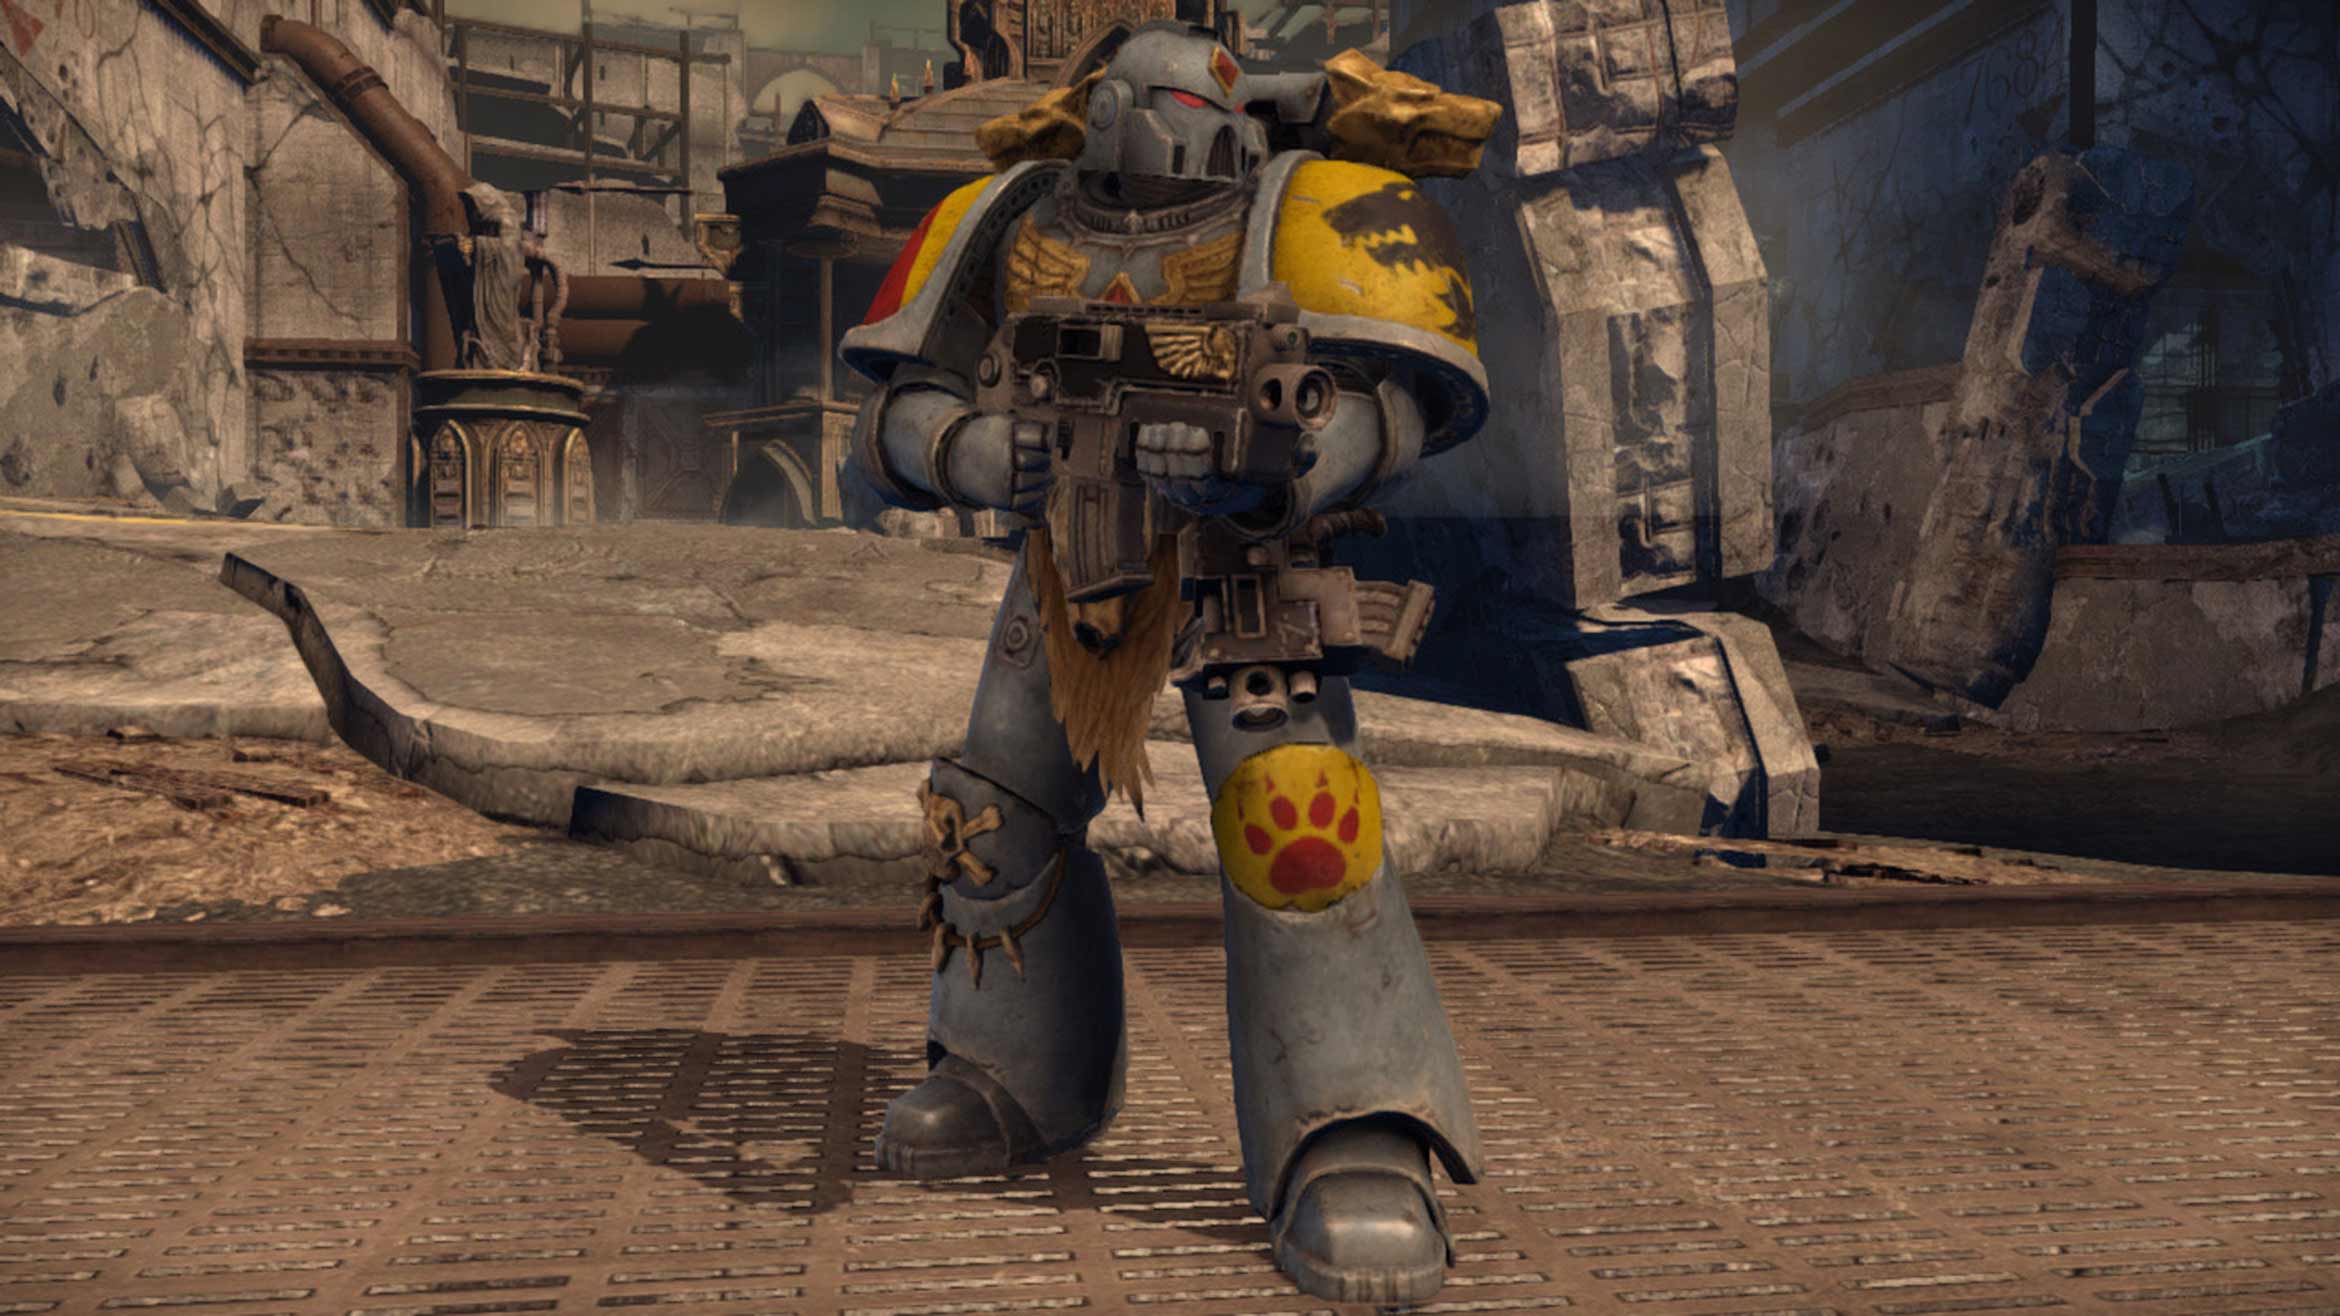 Warhammer 40,000: Space Marine is free for a limited time